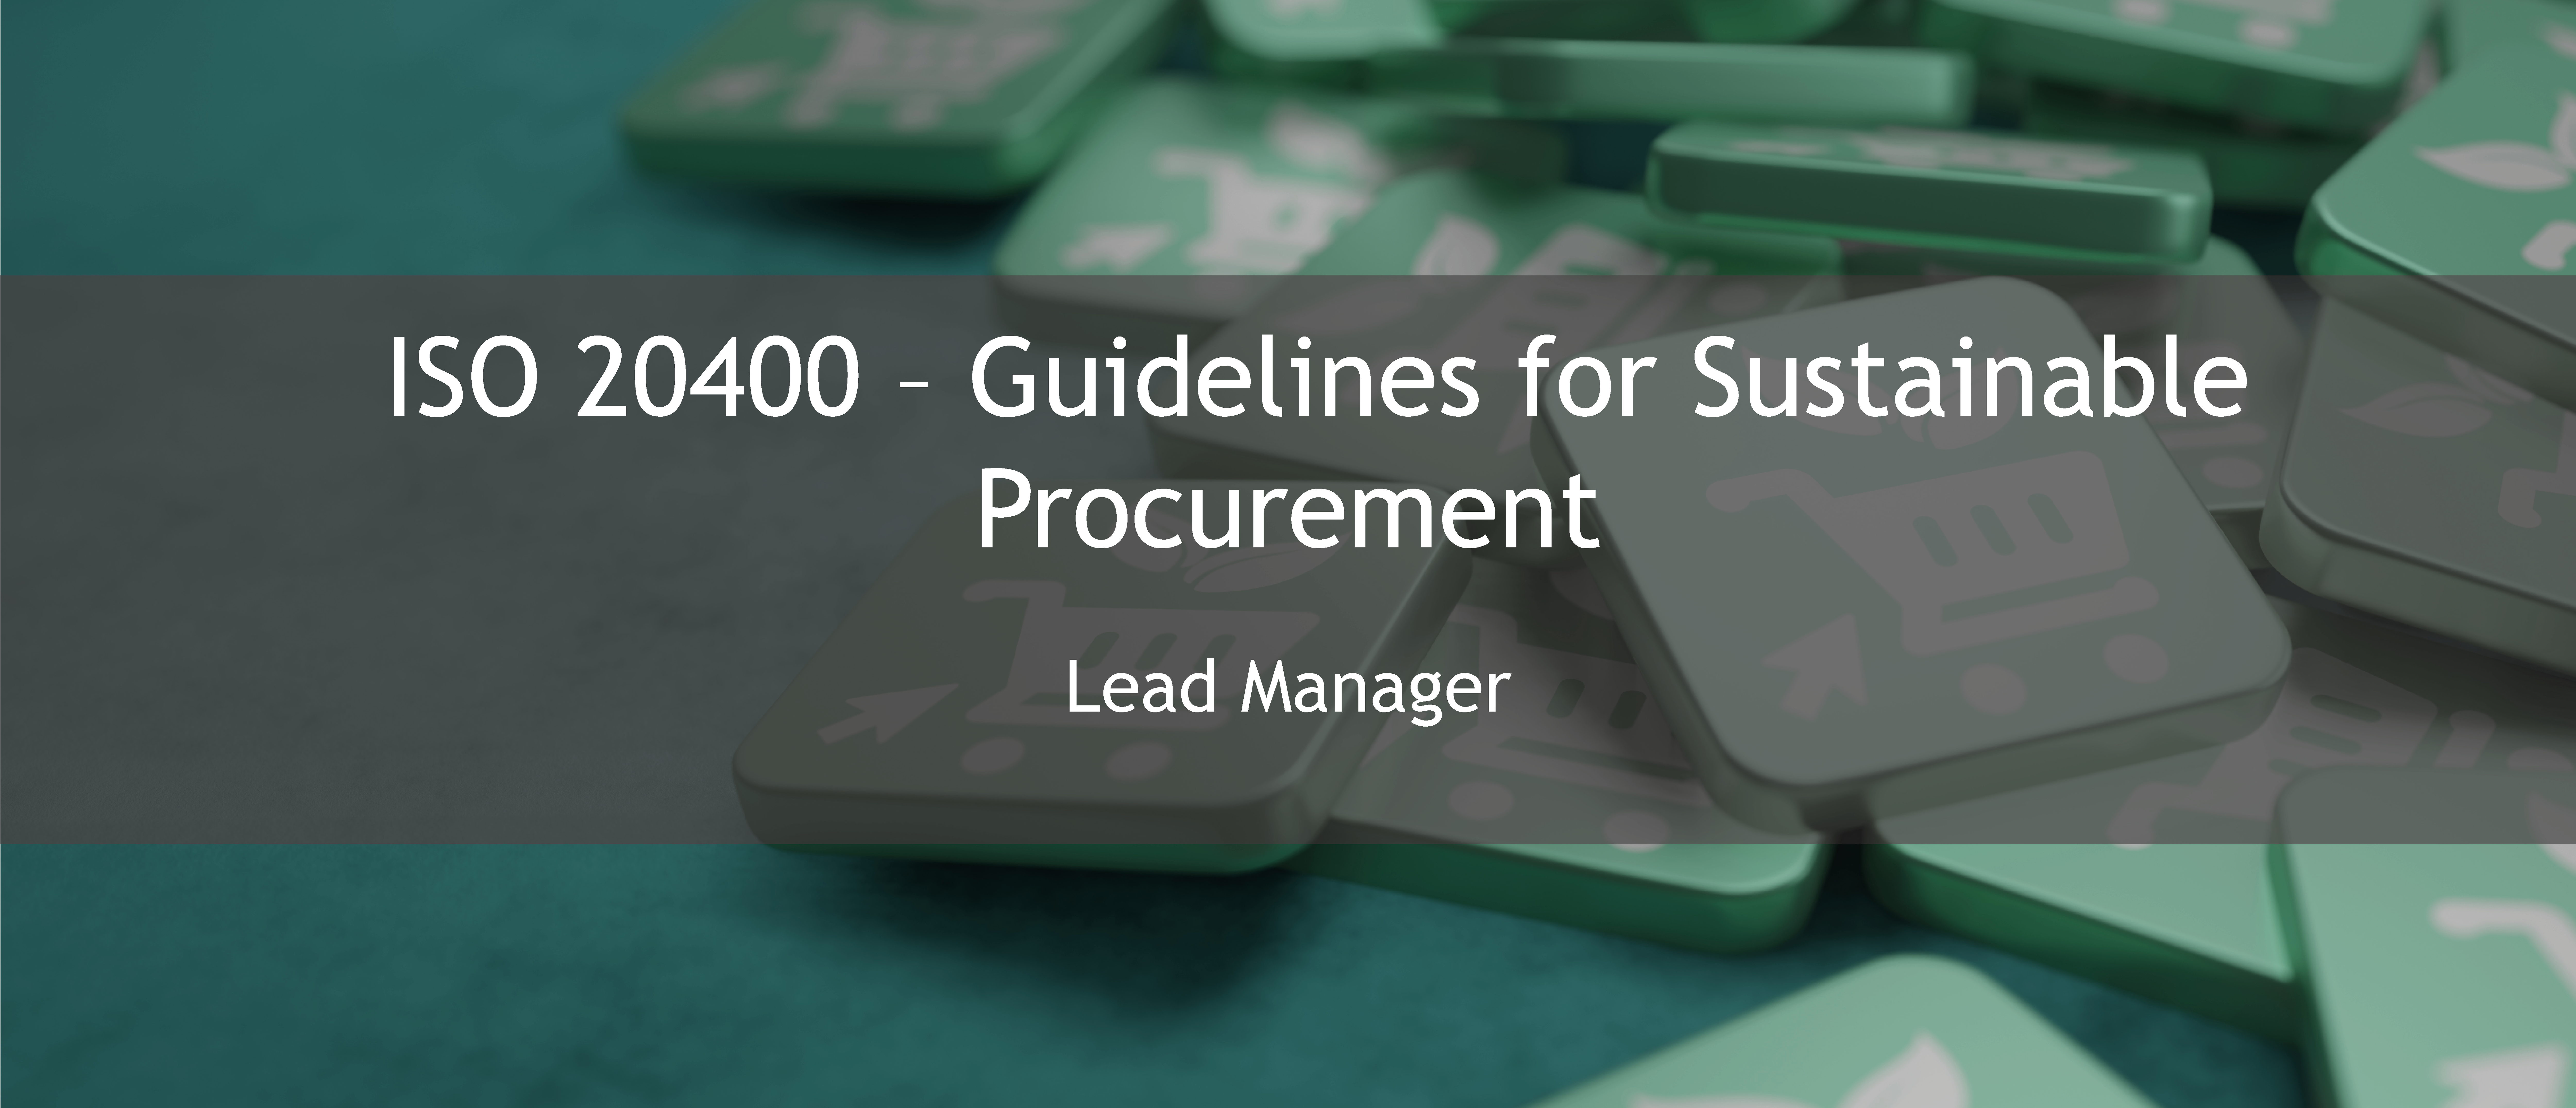 ISO 20400 training offer 1 - ISO 20400 Guidelines for Sustainable Procurement